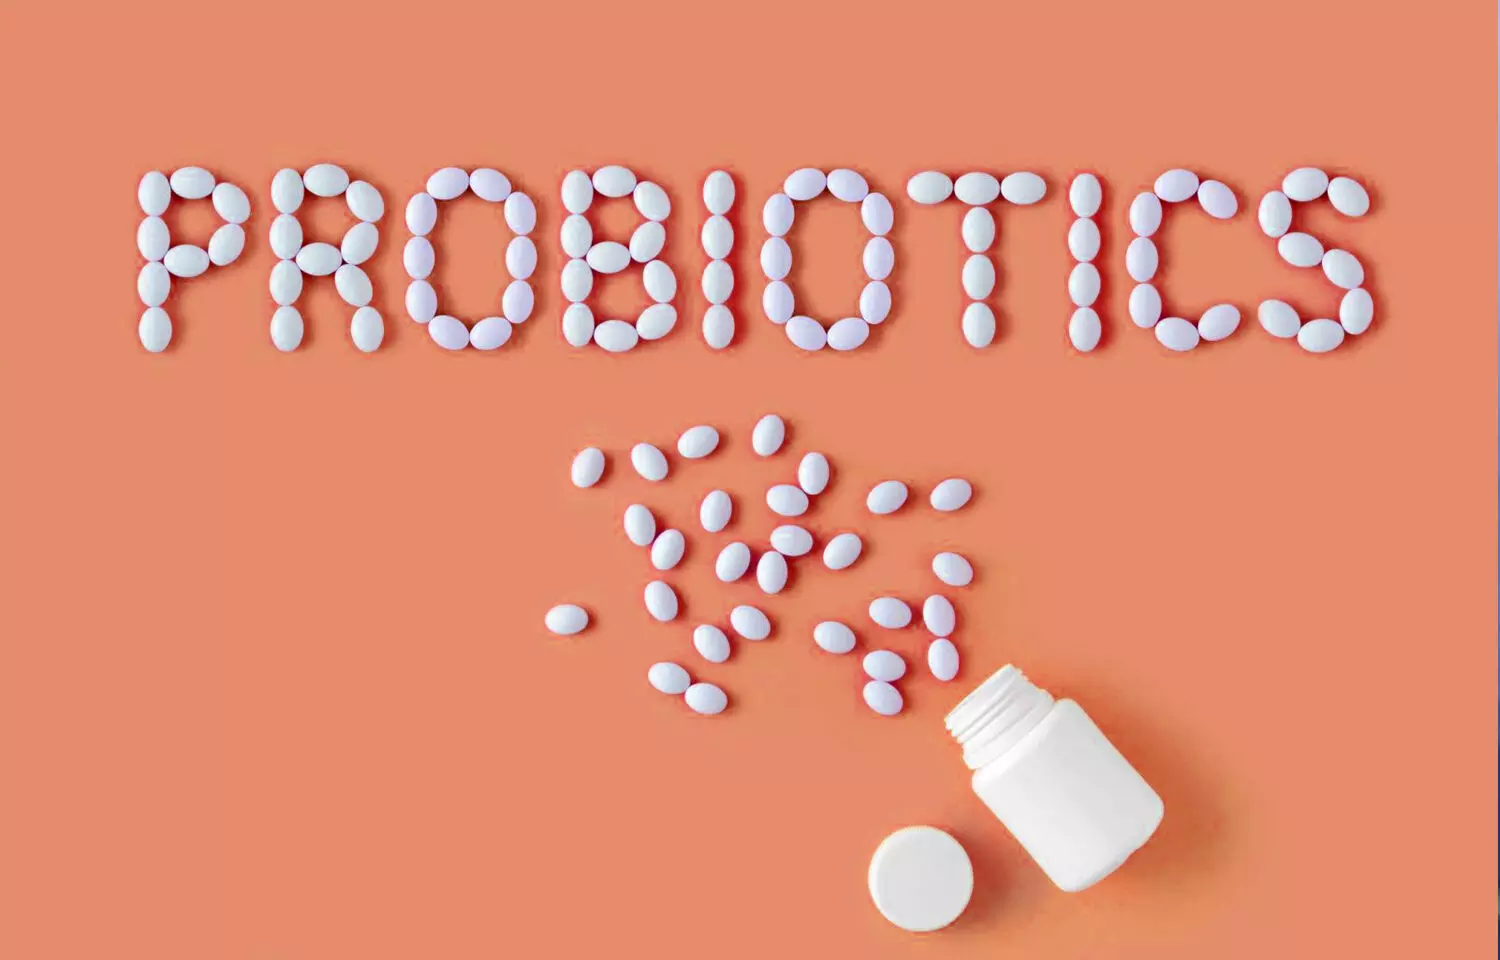 Probiotics with SRP effective for treatment of periodontitis, Finds study